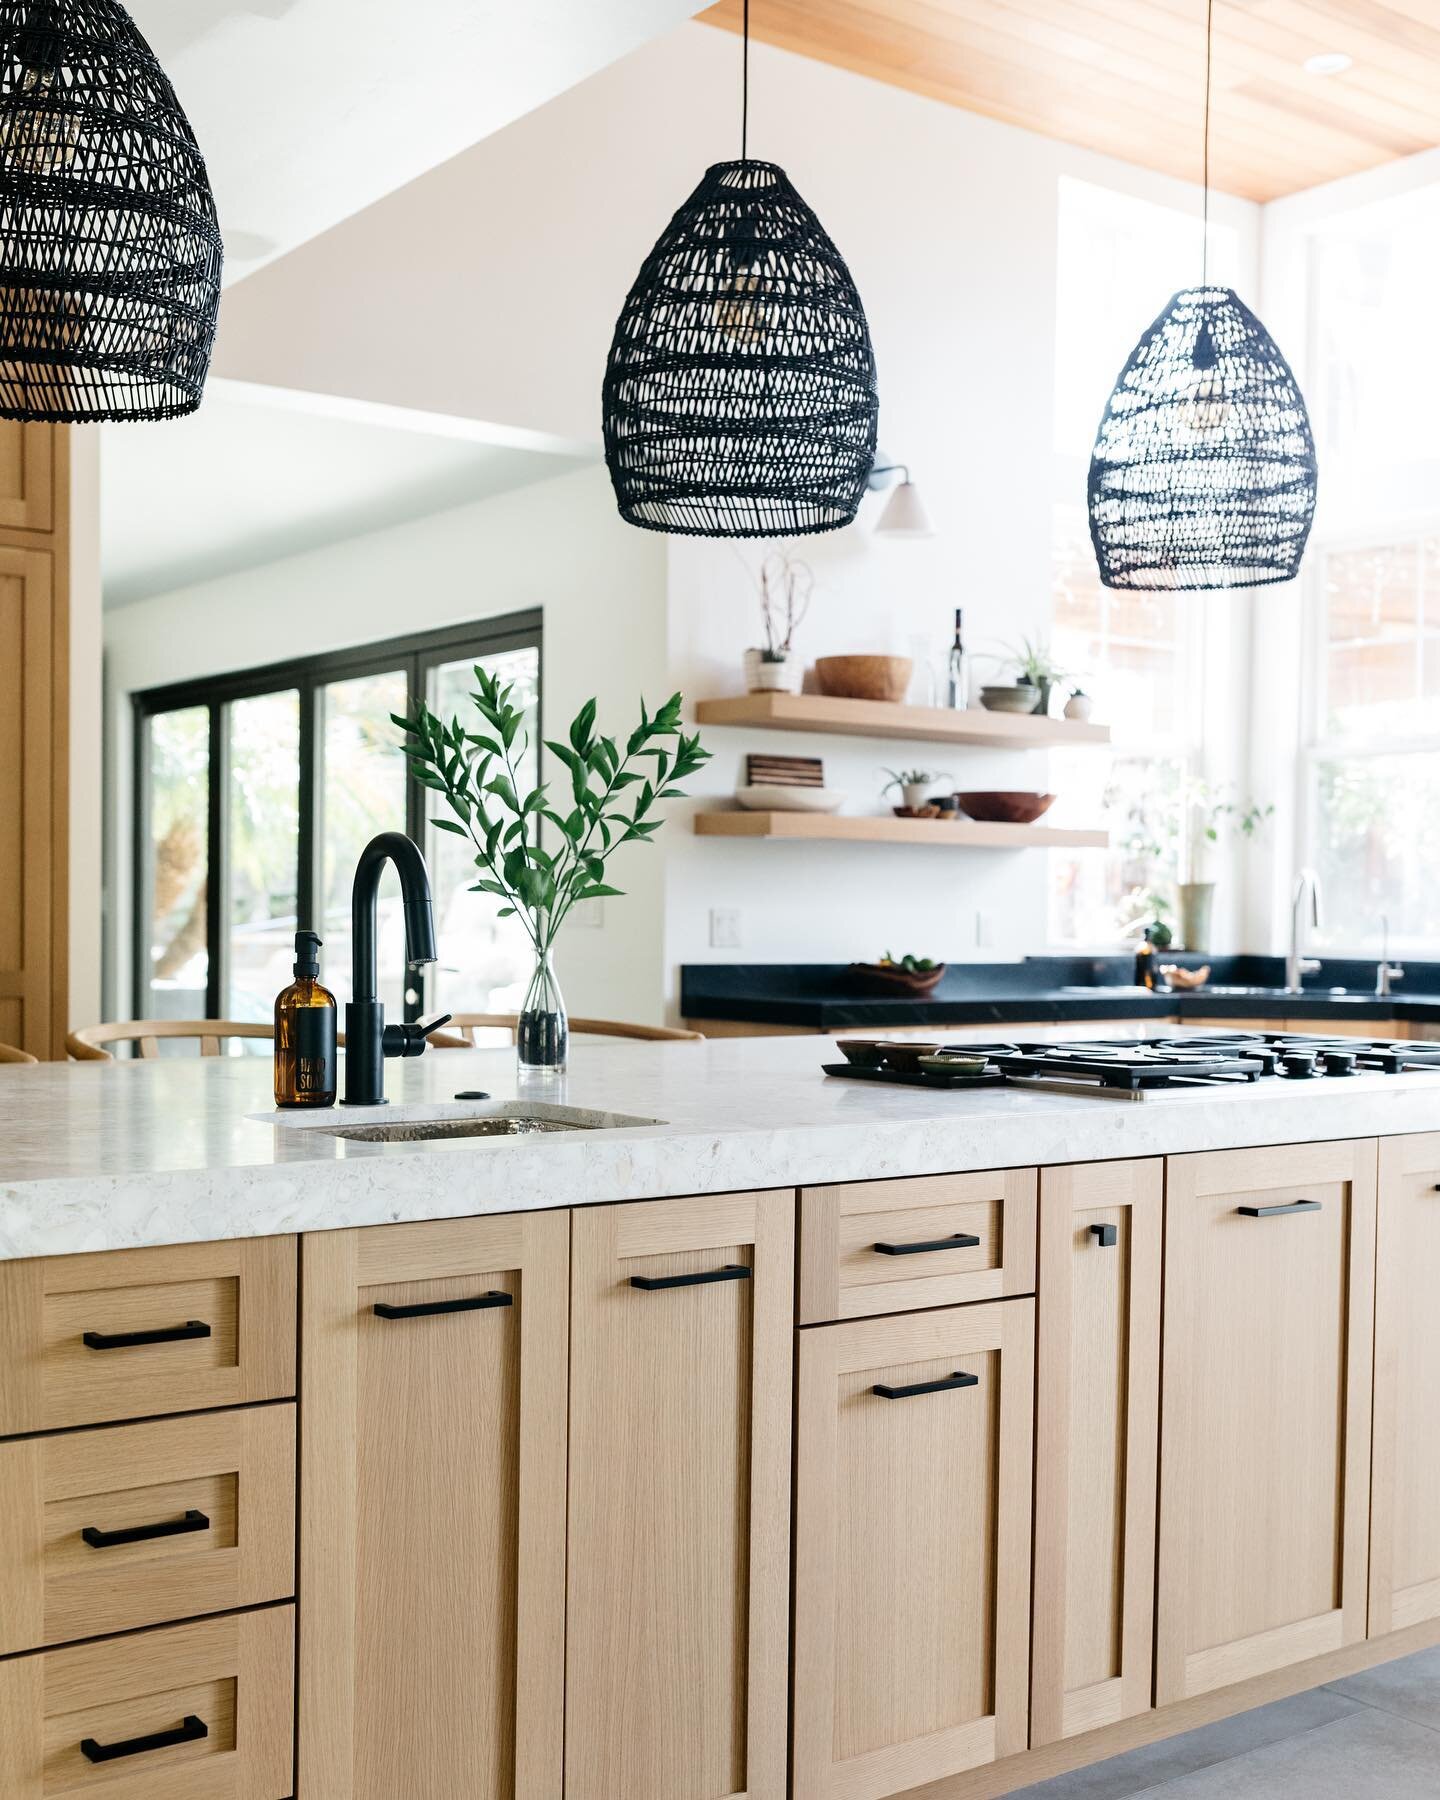 Can an island realllyyy ever be TOO big? As long as you have the space, we say go for it! General rule: leave 42-48 inches of space around your island. This will keep the kitchen from feeling cramped and instead make the island placement harmonious w